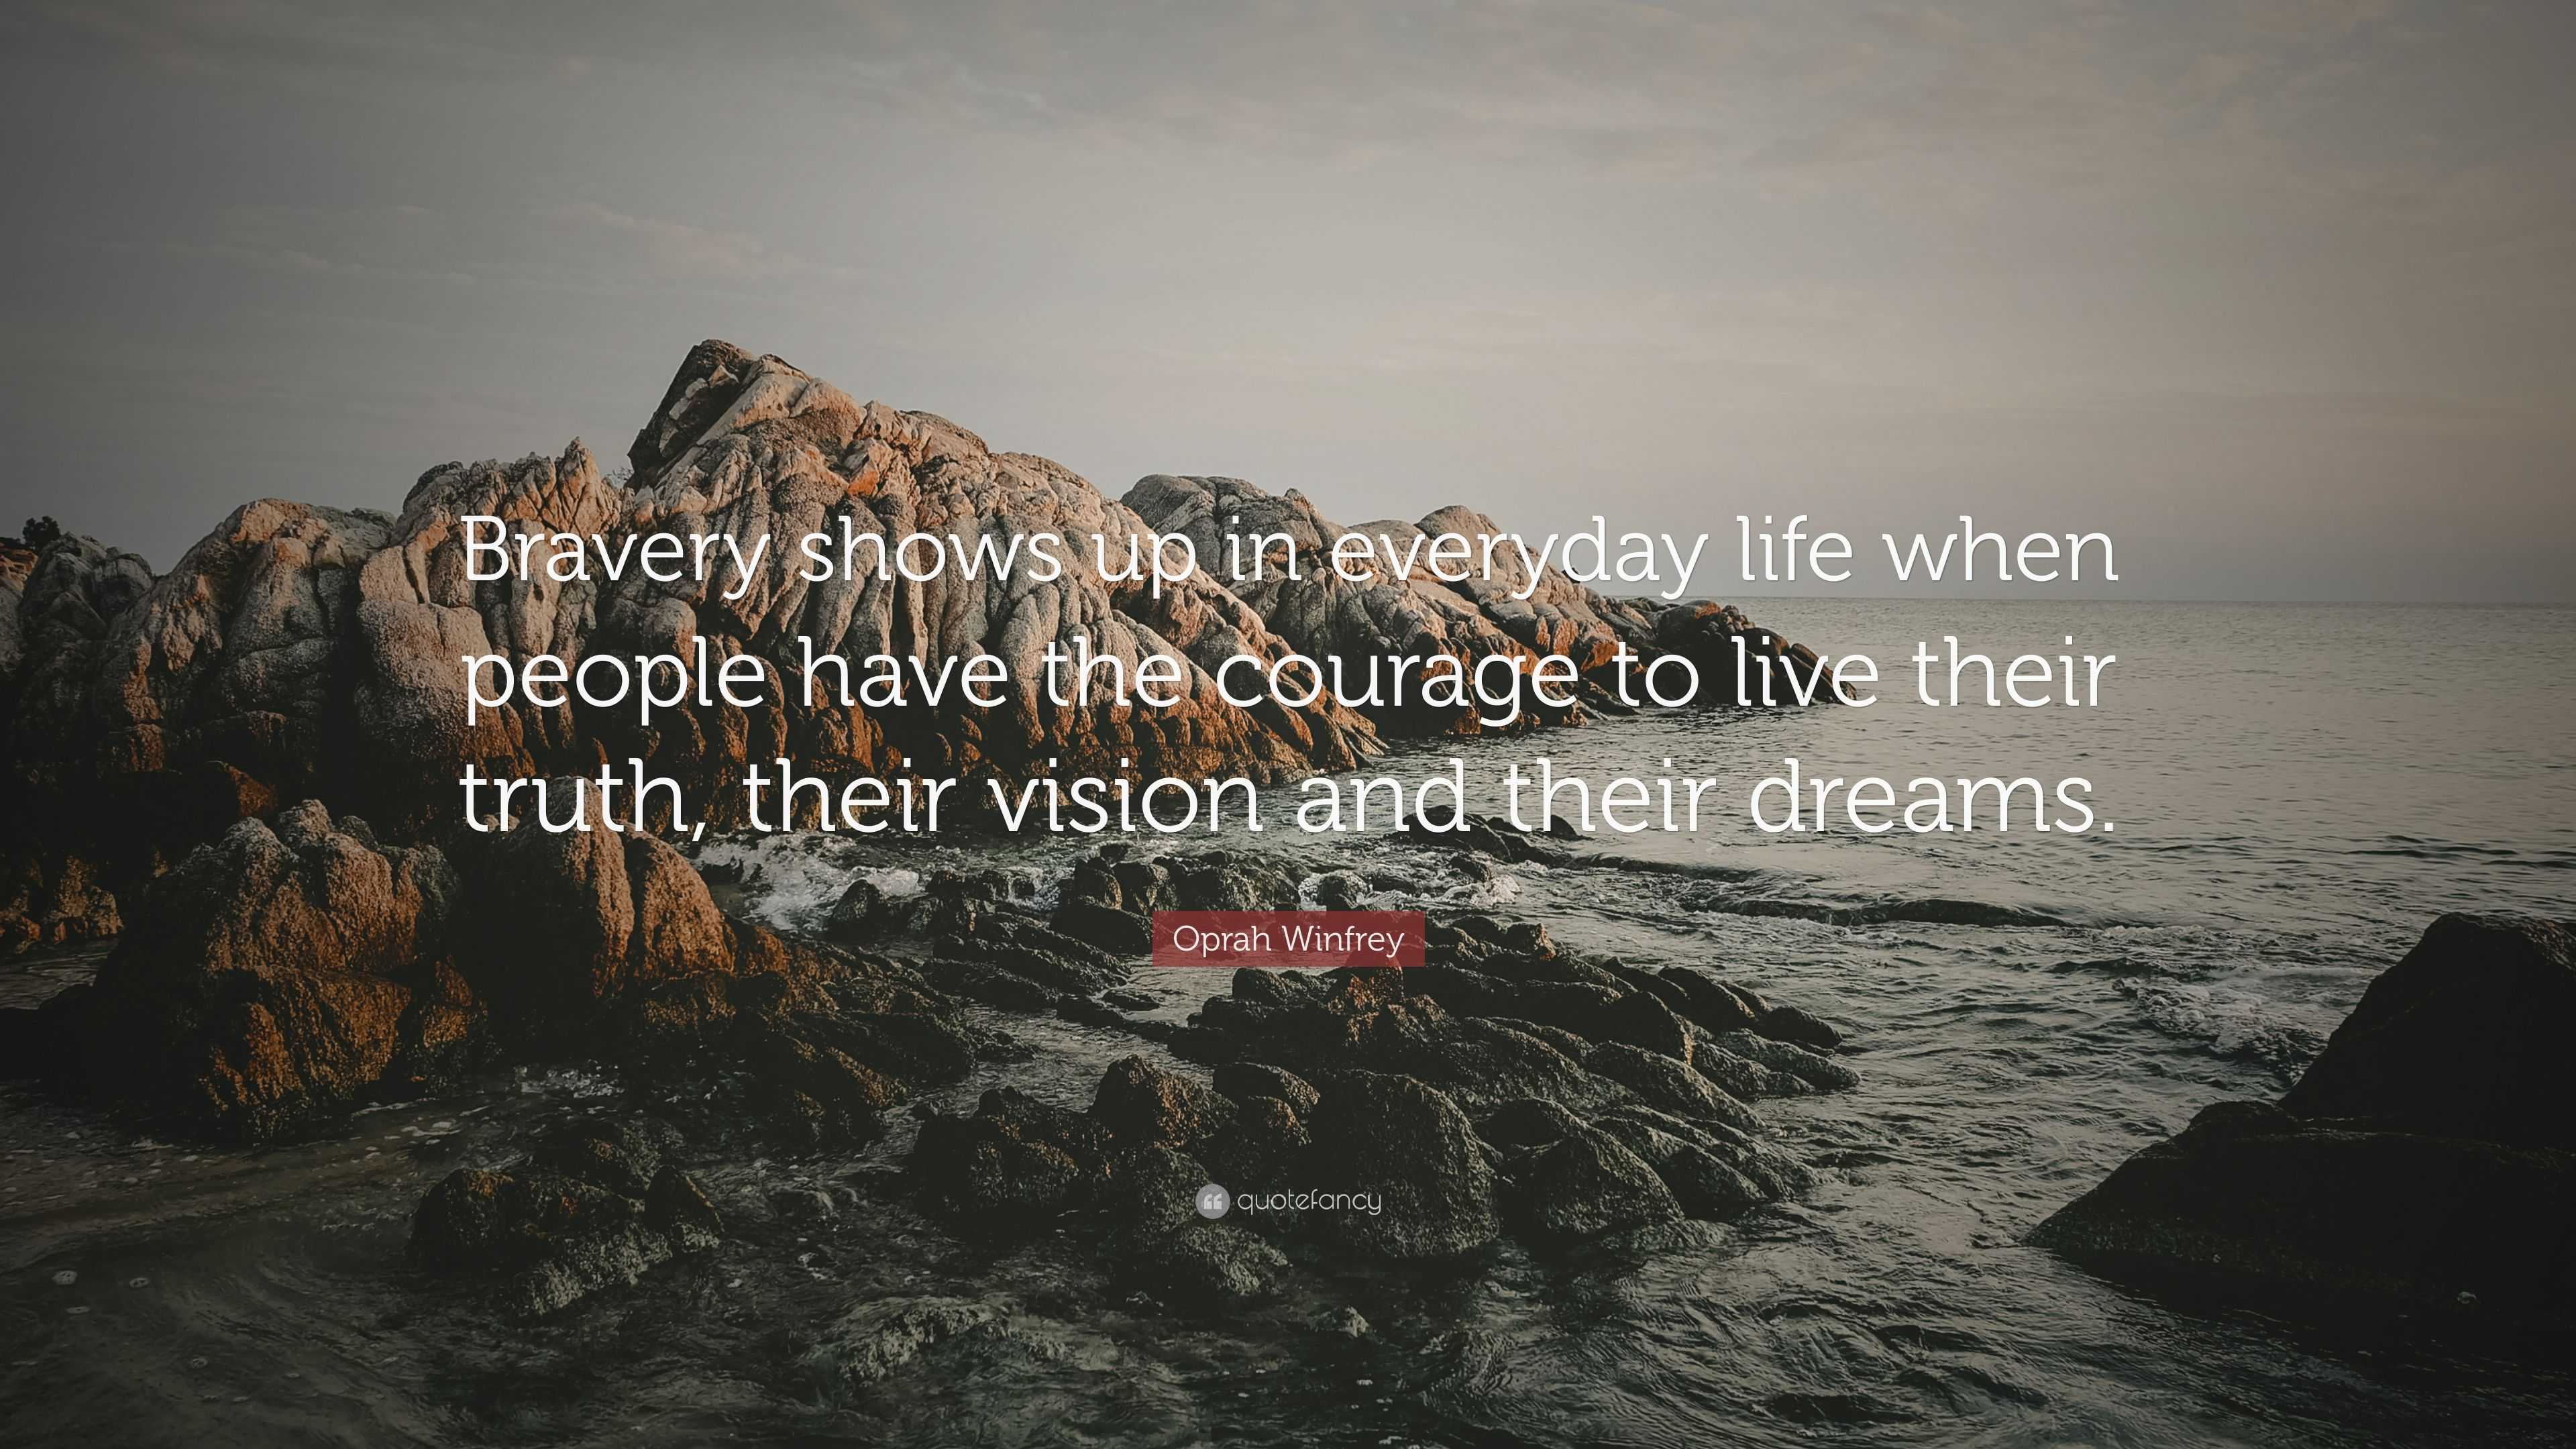 https://quotefancy.com/media/wallpaper/3840x2160/3749753-Oprah-Winfrey-Quote-Bravery-shows-up-in-everyday-life-when-people.jpg